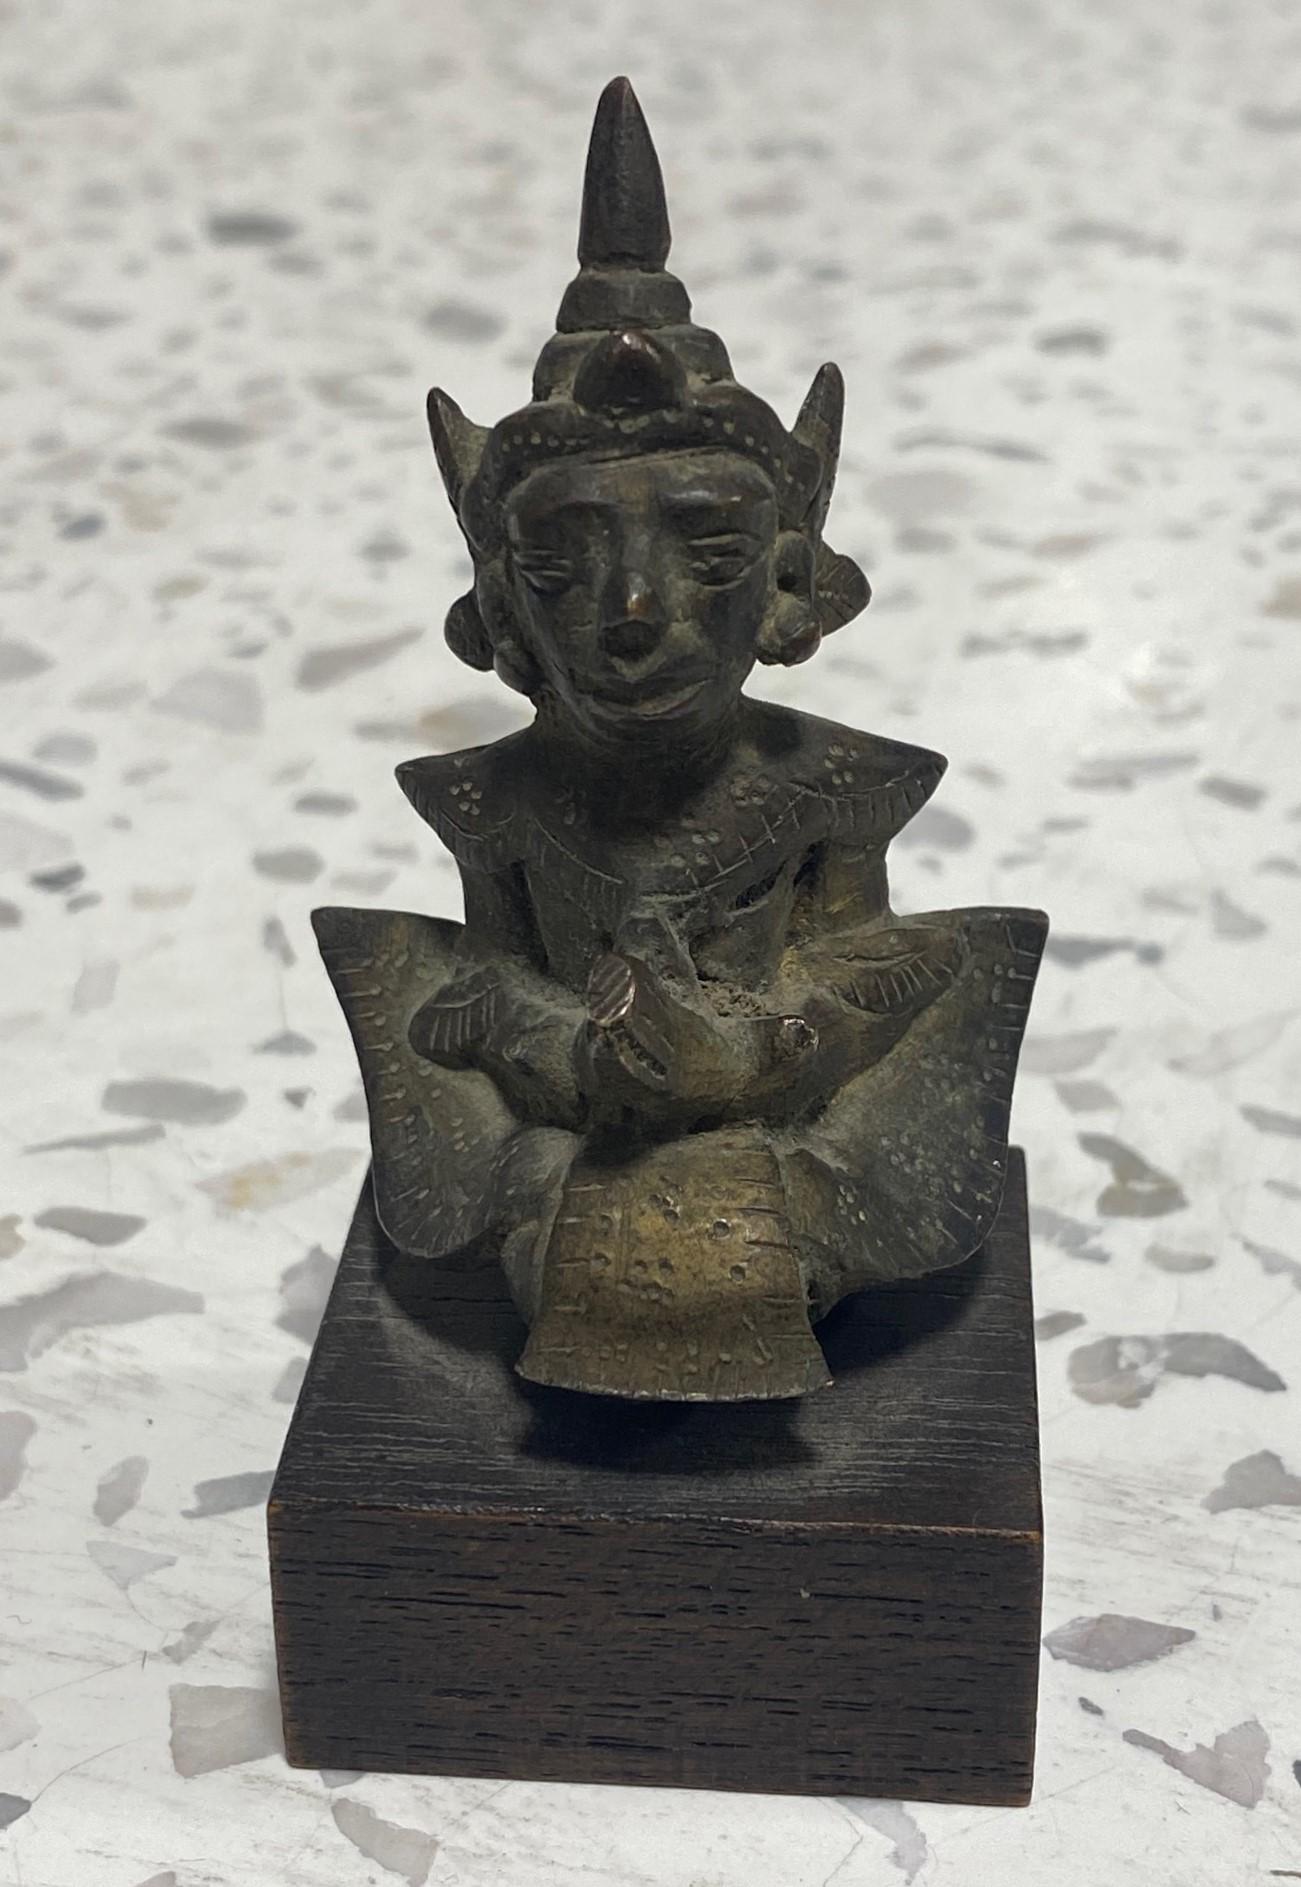 A beautiful small bronze Asian Buddhist or Indian Hindu praying deity figure on a wood stand.

This piece has a wonderful feel and presence to it.

From an extensive private Los Angeles collection of Asian art and artifacts. One of the best